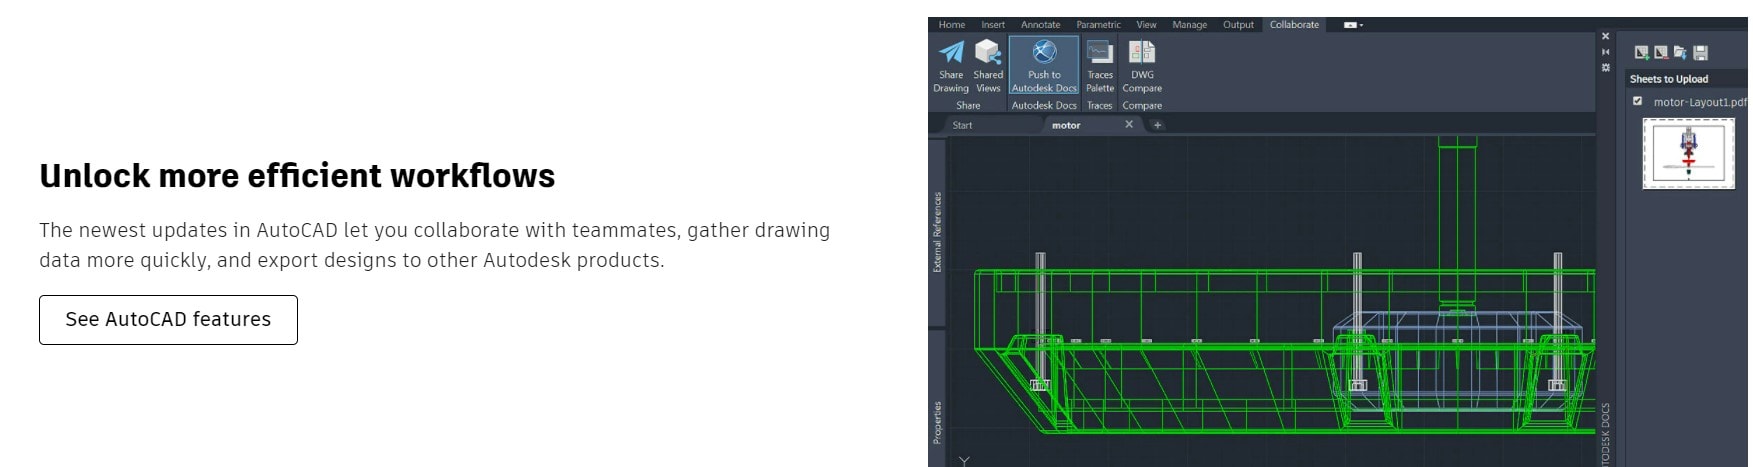 Autodesk AutoCAD Review Measure Tool and Other Improvements